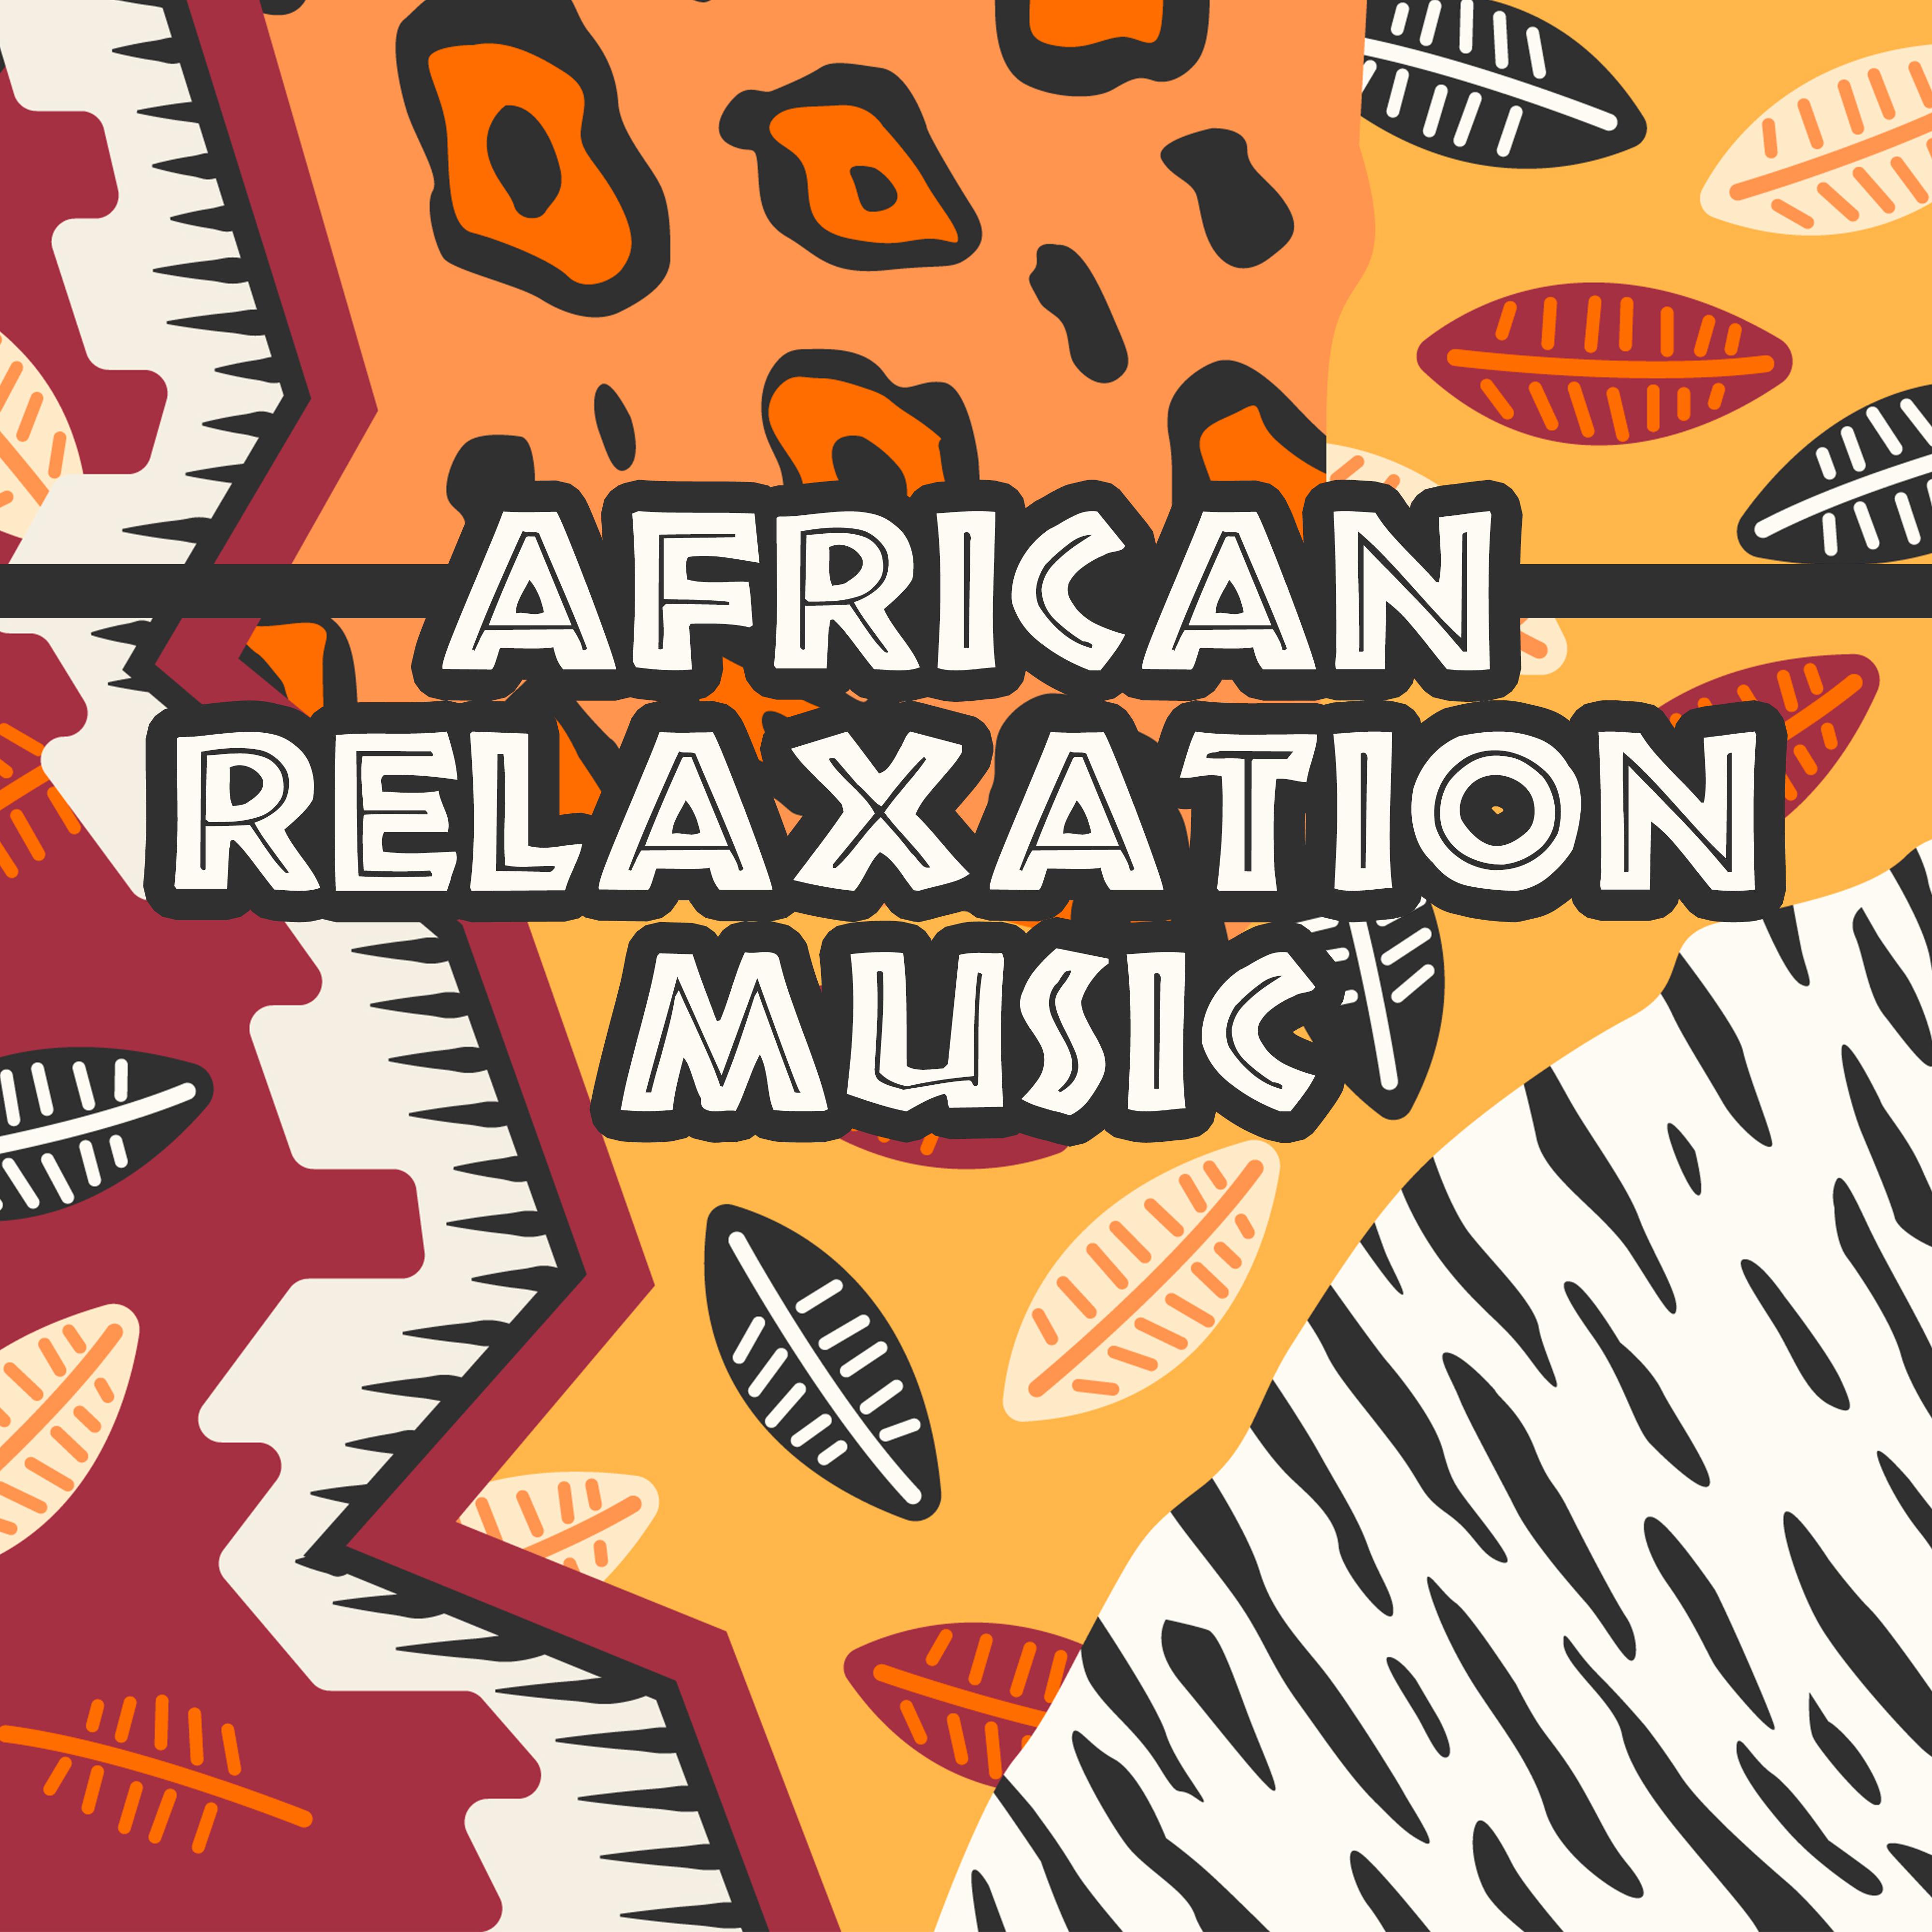 African Relaxation Music: Calm Music with African Drums and Jungle Sounds, Nature Soundscapes, Shamanic Rhythms, Ethnic Melodies, Tribal Music